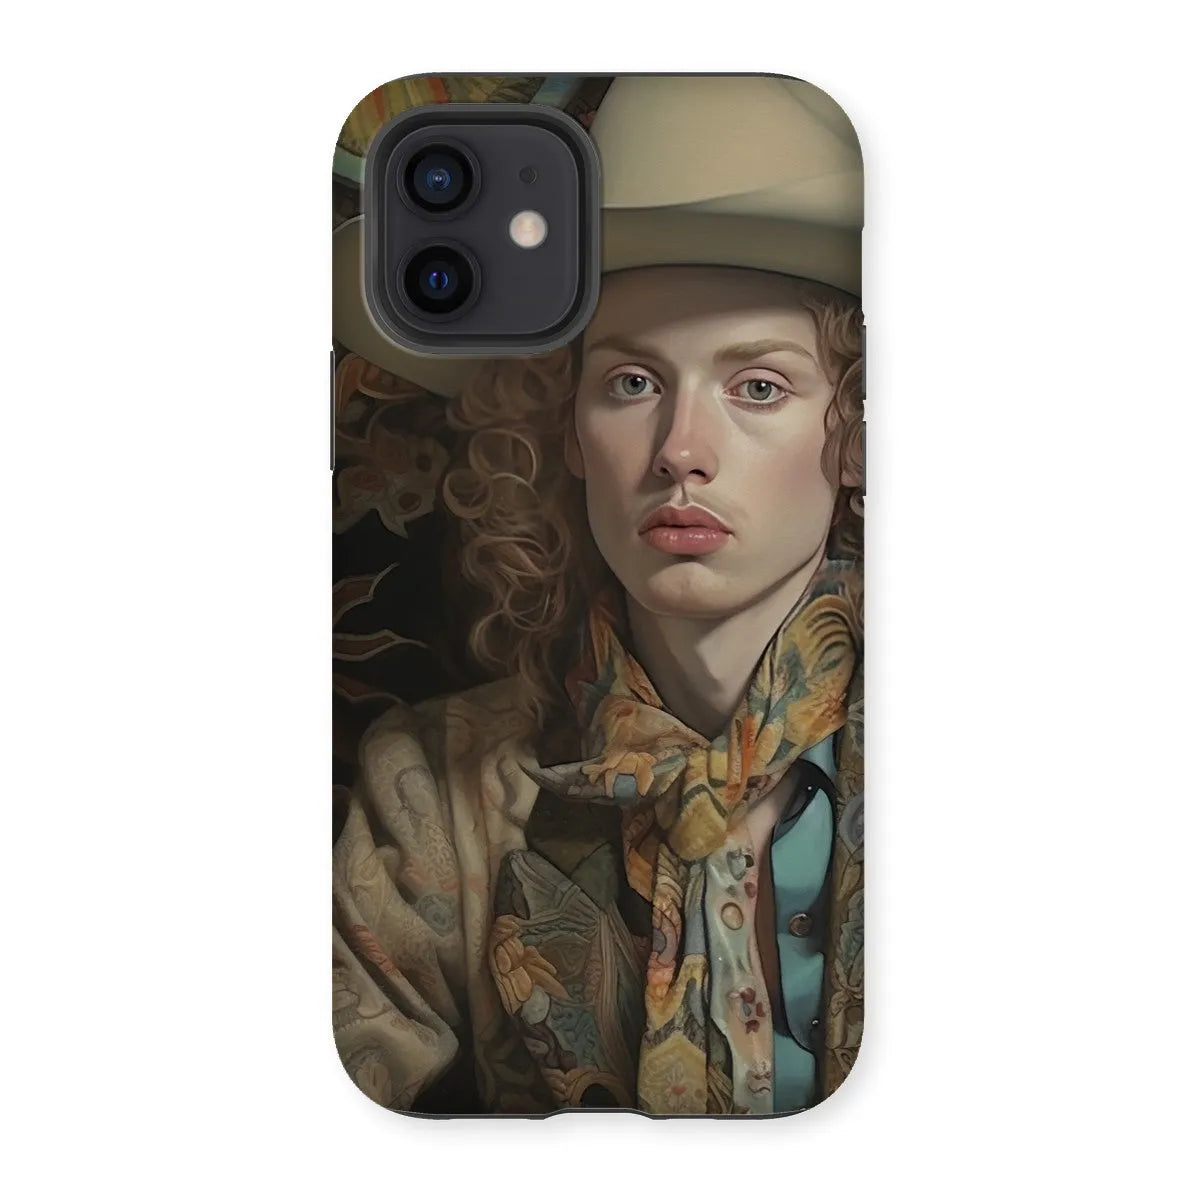 Ollie The Transgender Cowboy - F2m Dandy Outlaw Phone Case - Iphone 12 / Matte - Mobile Phone Cases - Aesthetic Art